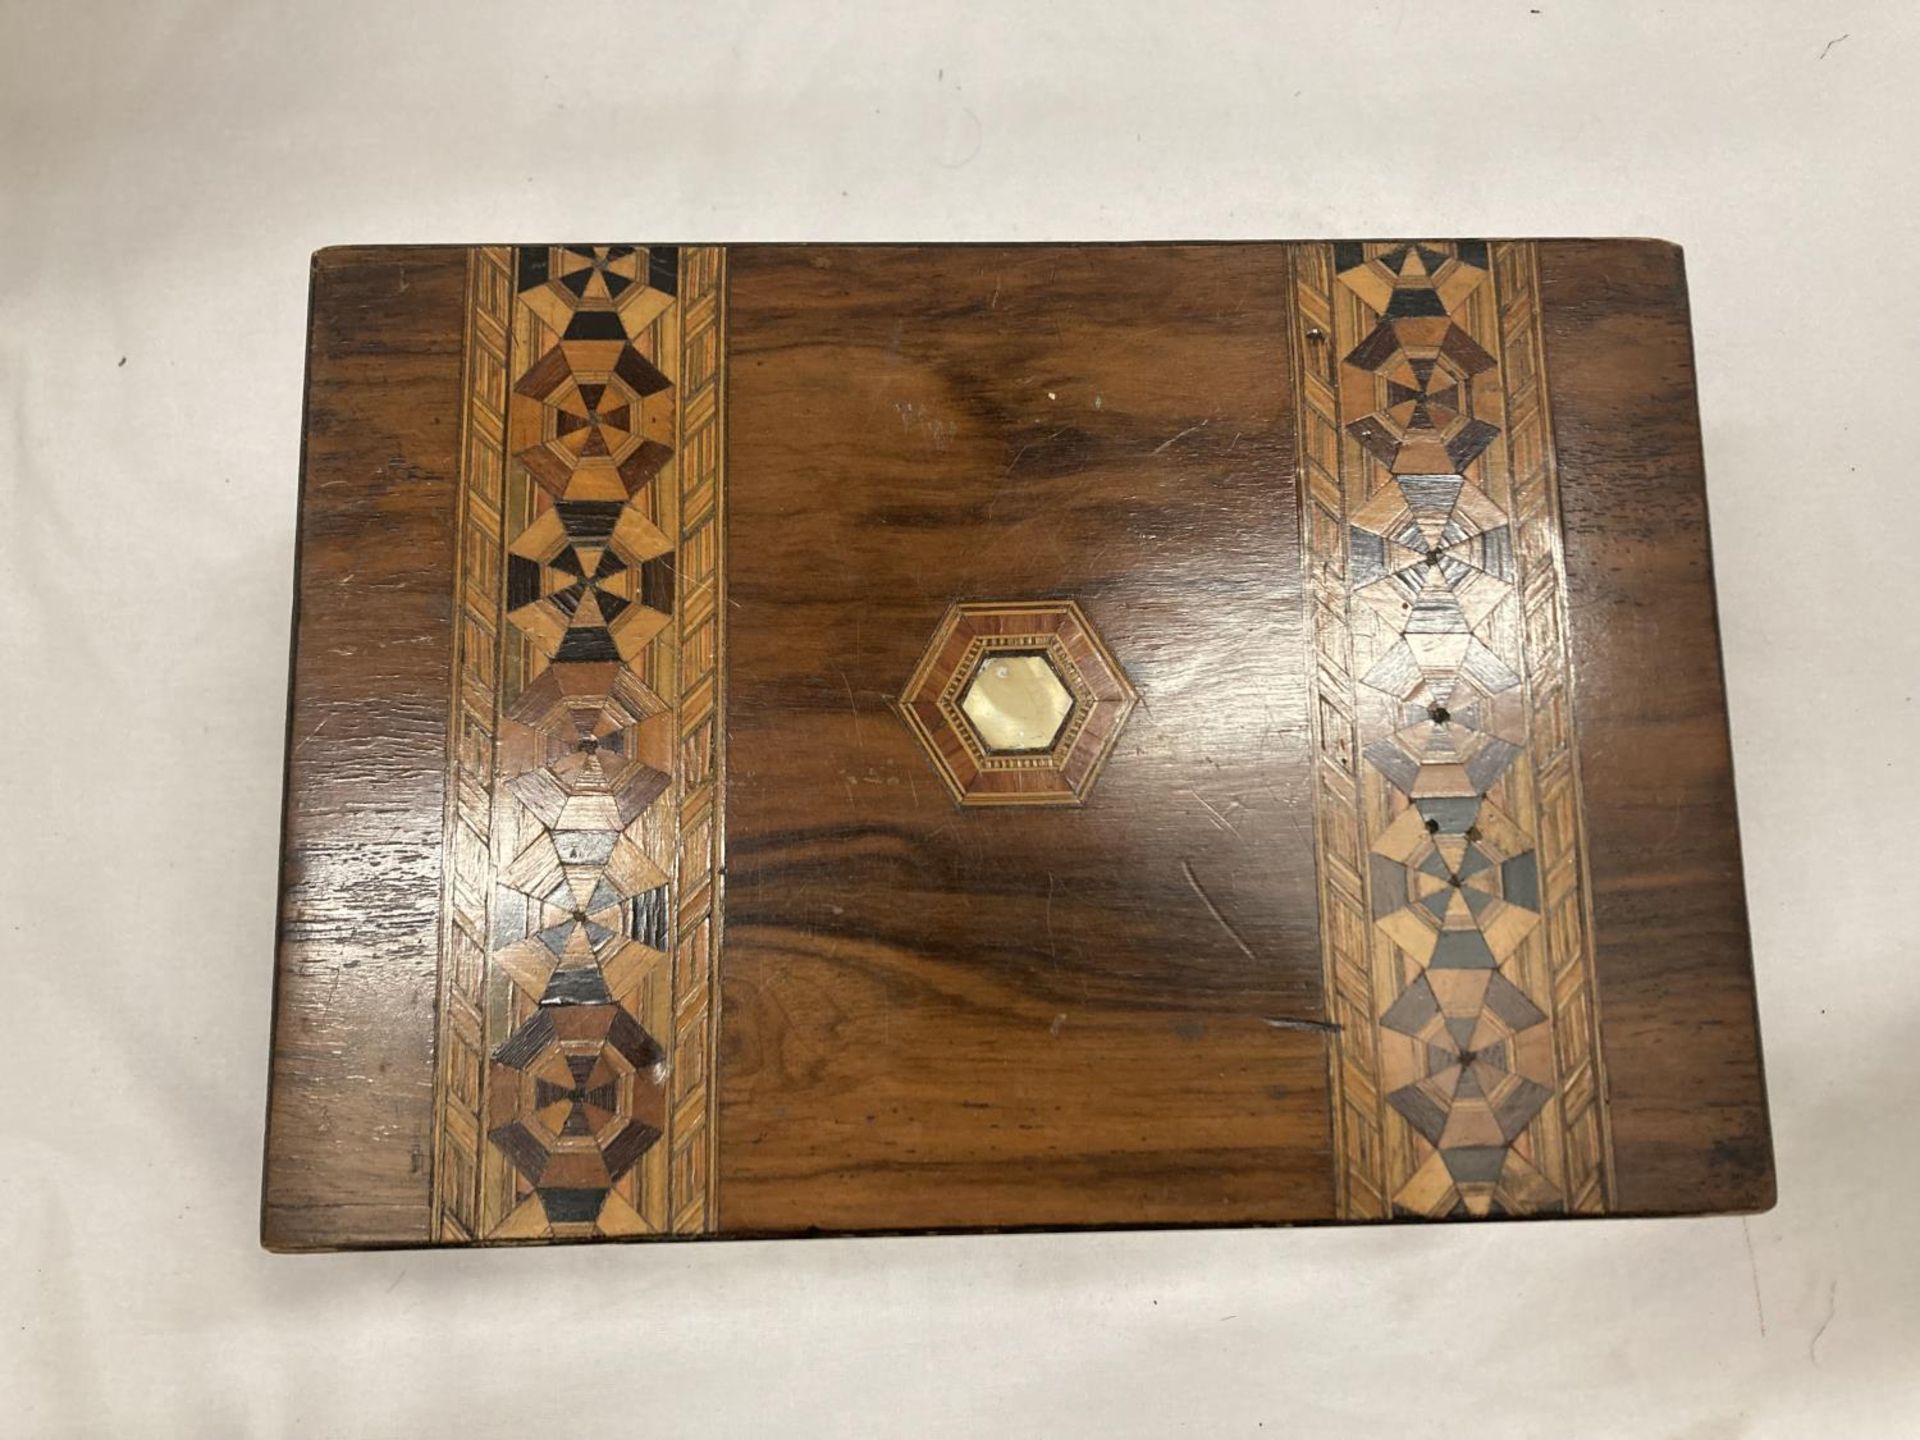 AN EARLY VICTORIAN ROSEWOOD ULTITY BOX WITH MARQUETRY AND NACRE 10" X 7" X 5" - Image 2 of 3